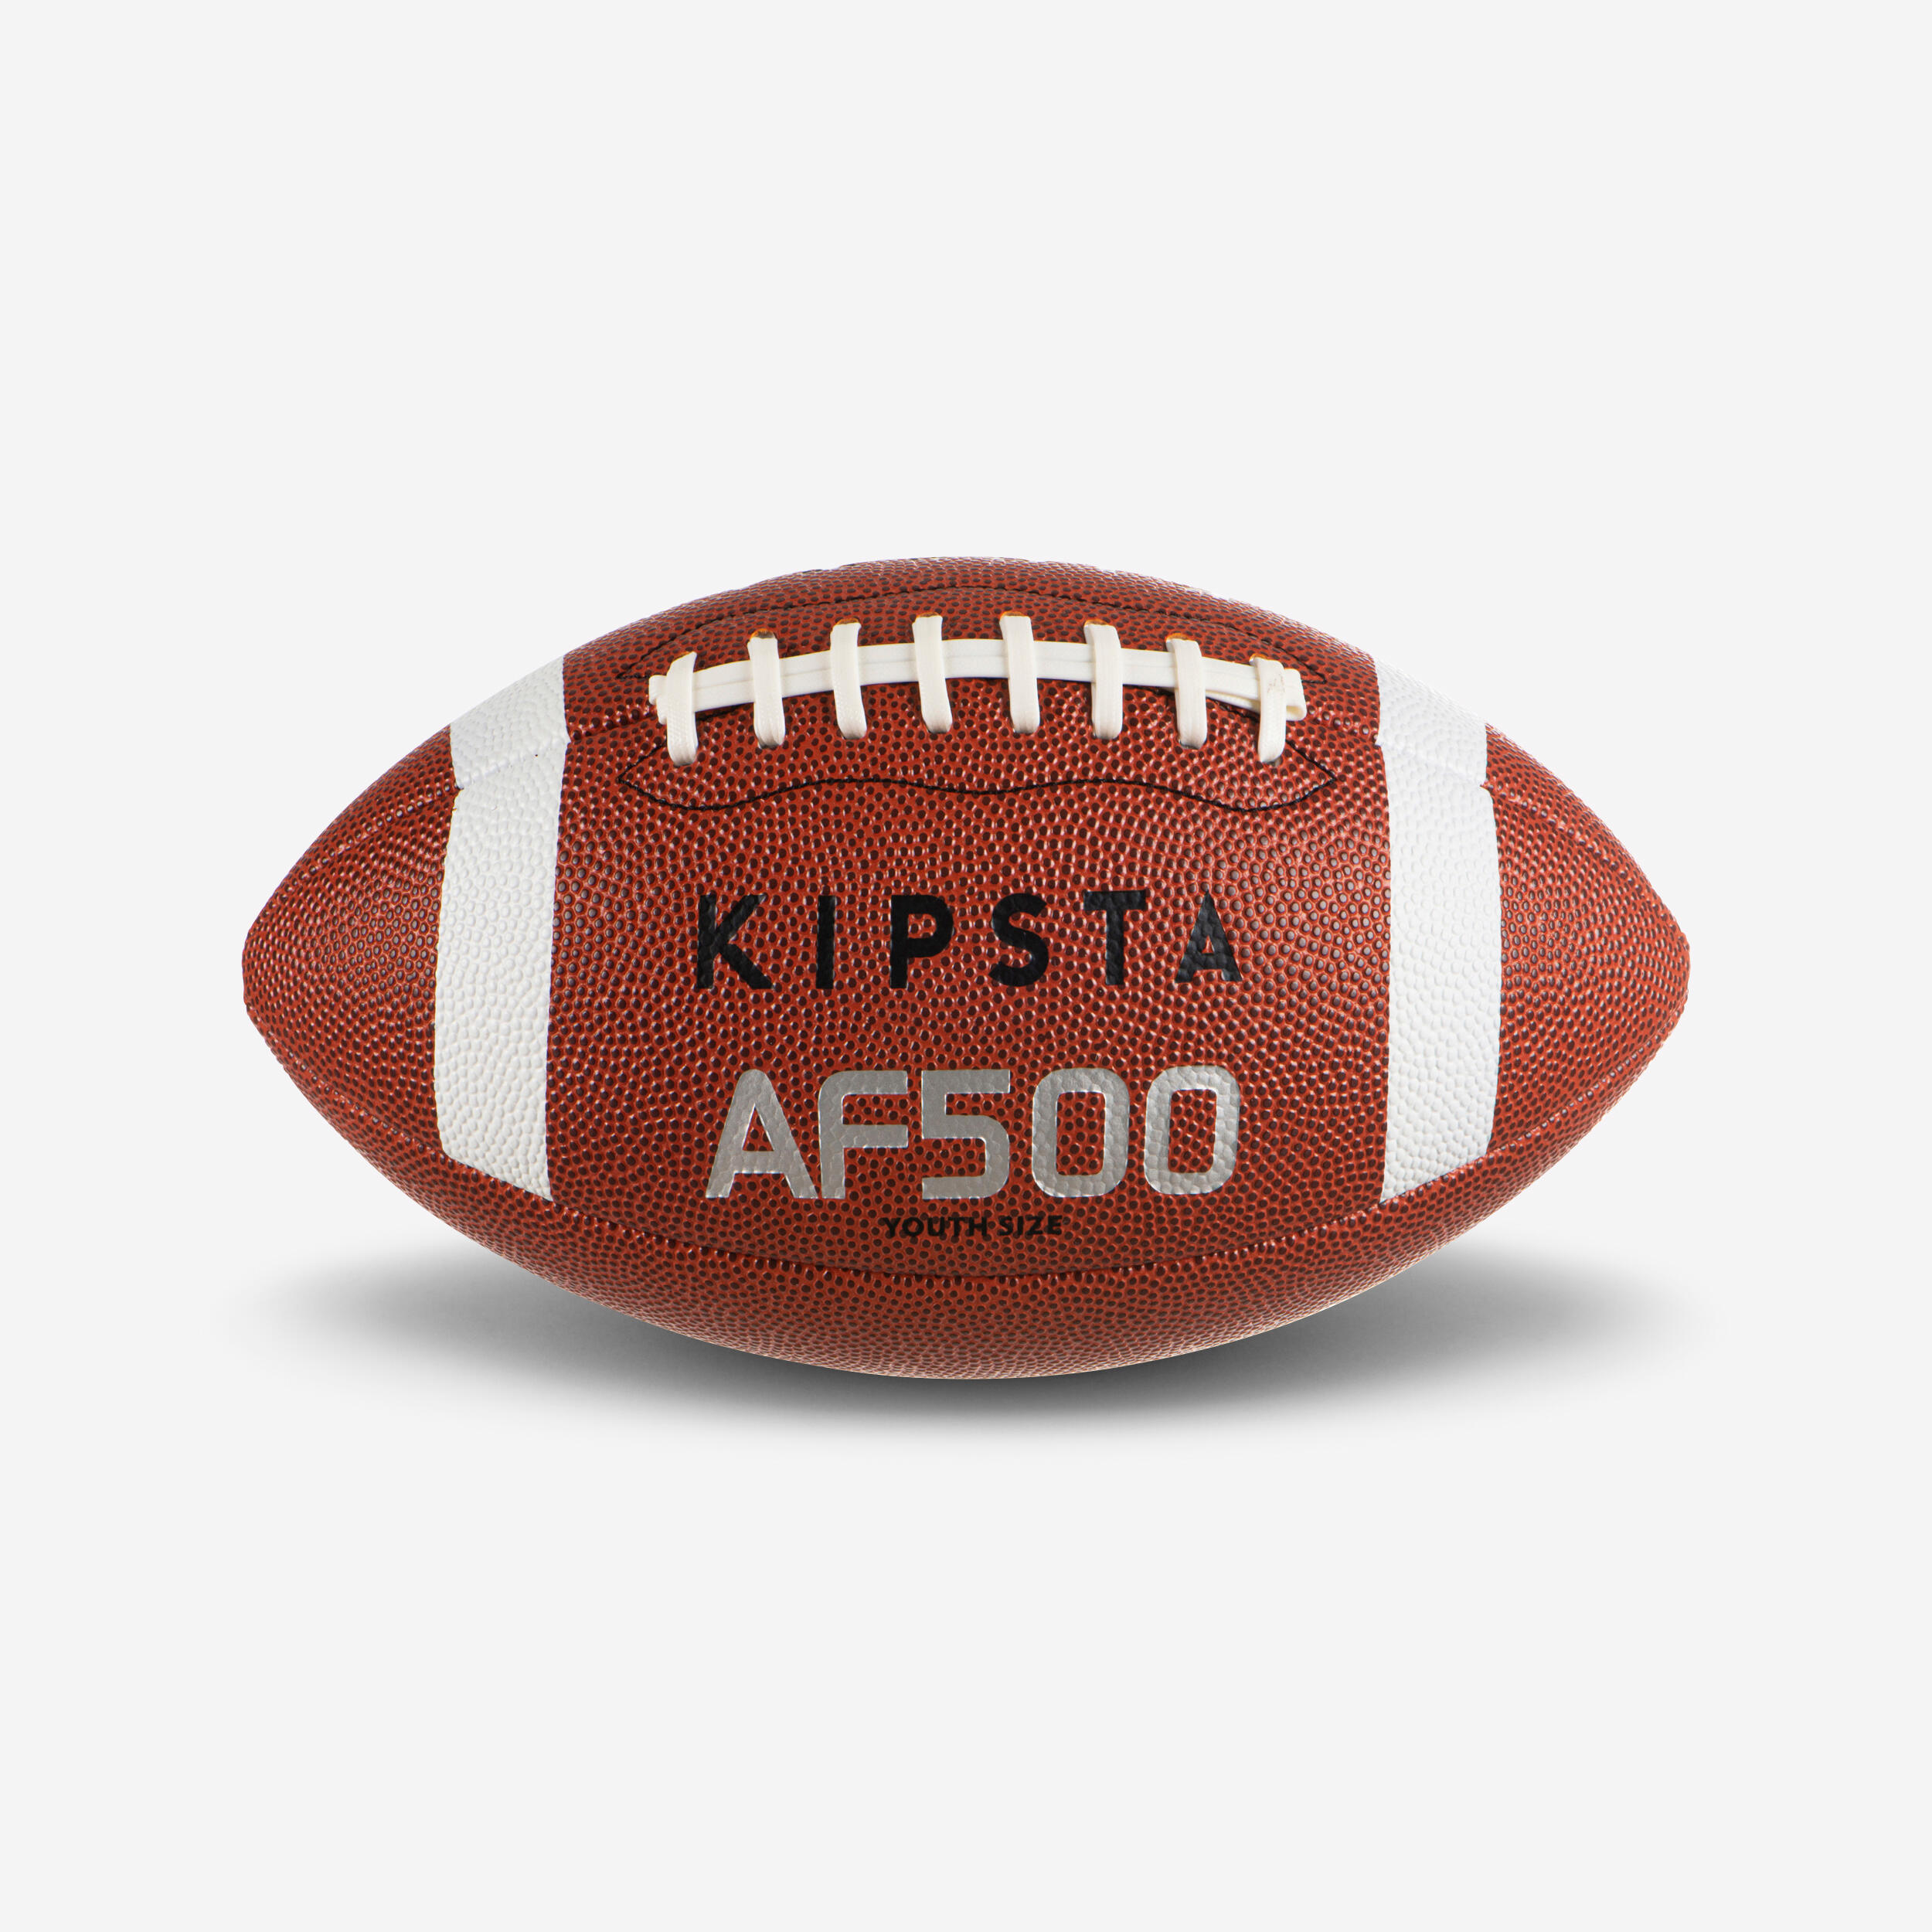 KIPSTA Youth Size American Football AF500 - Brown